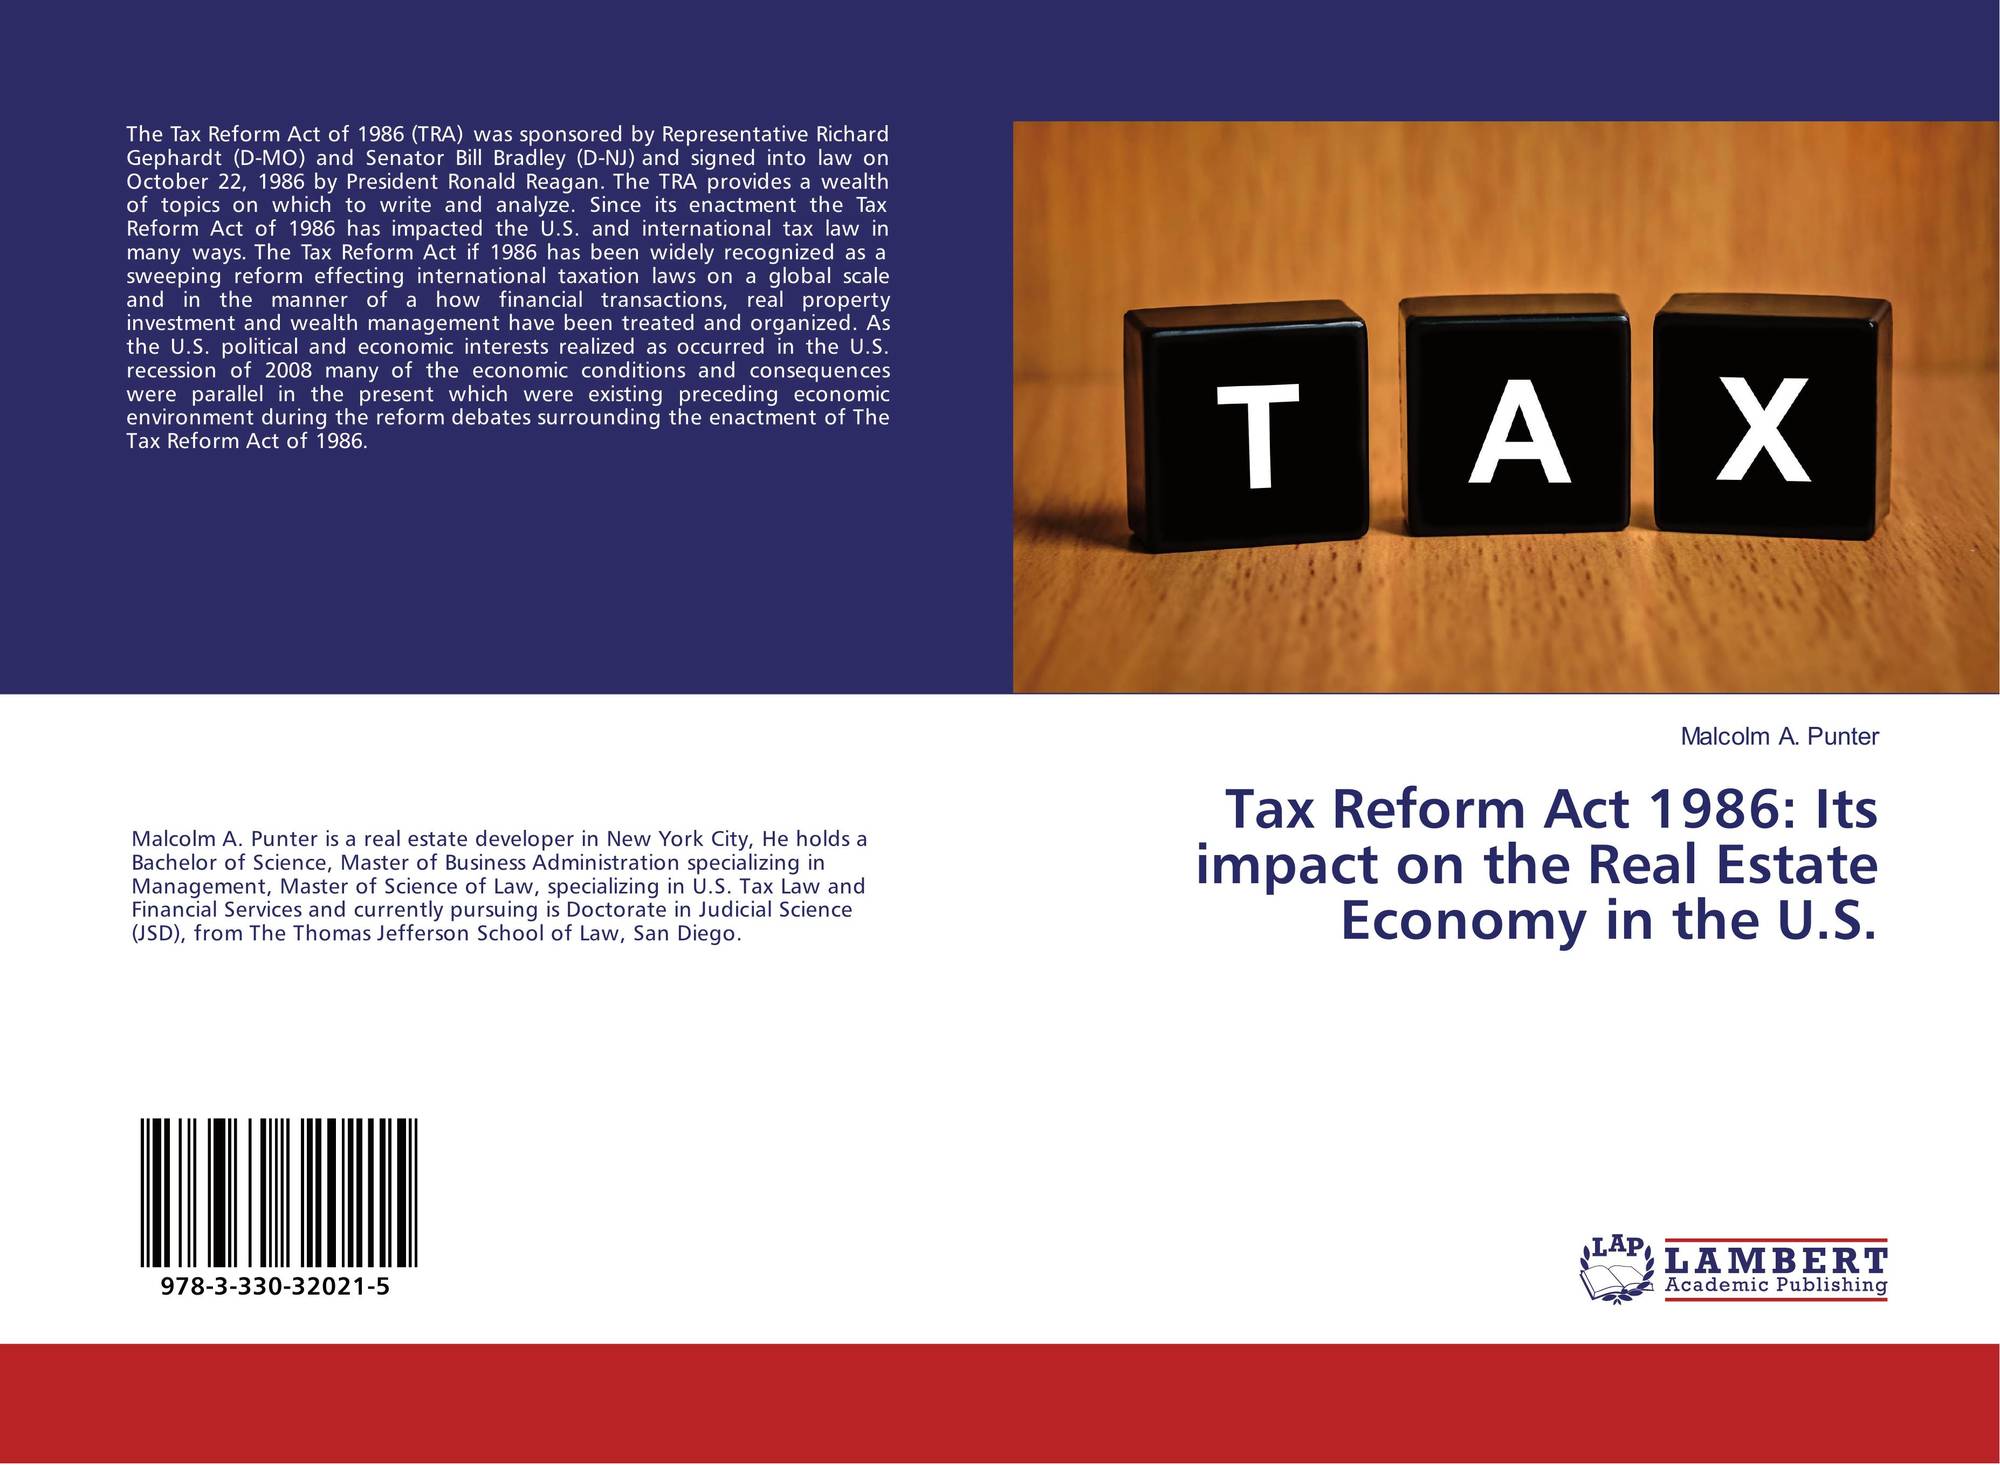 tax-reform-act-1986-its-impact-on-the-real-estate-economy-in-the-u-s